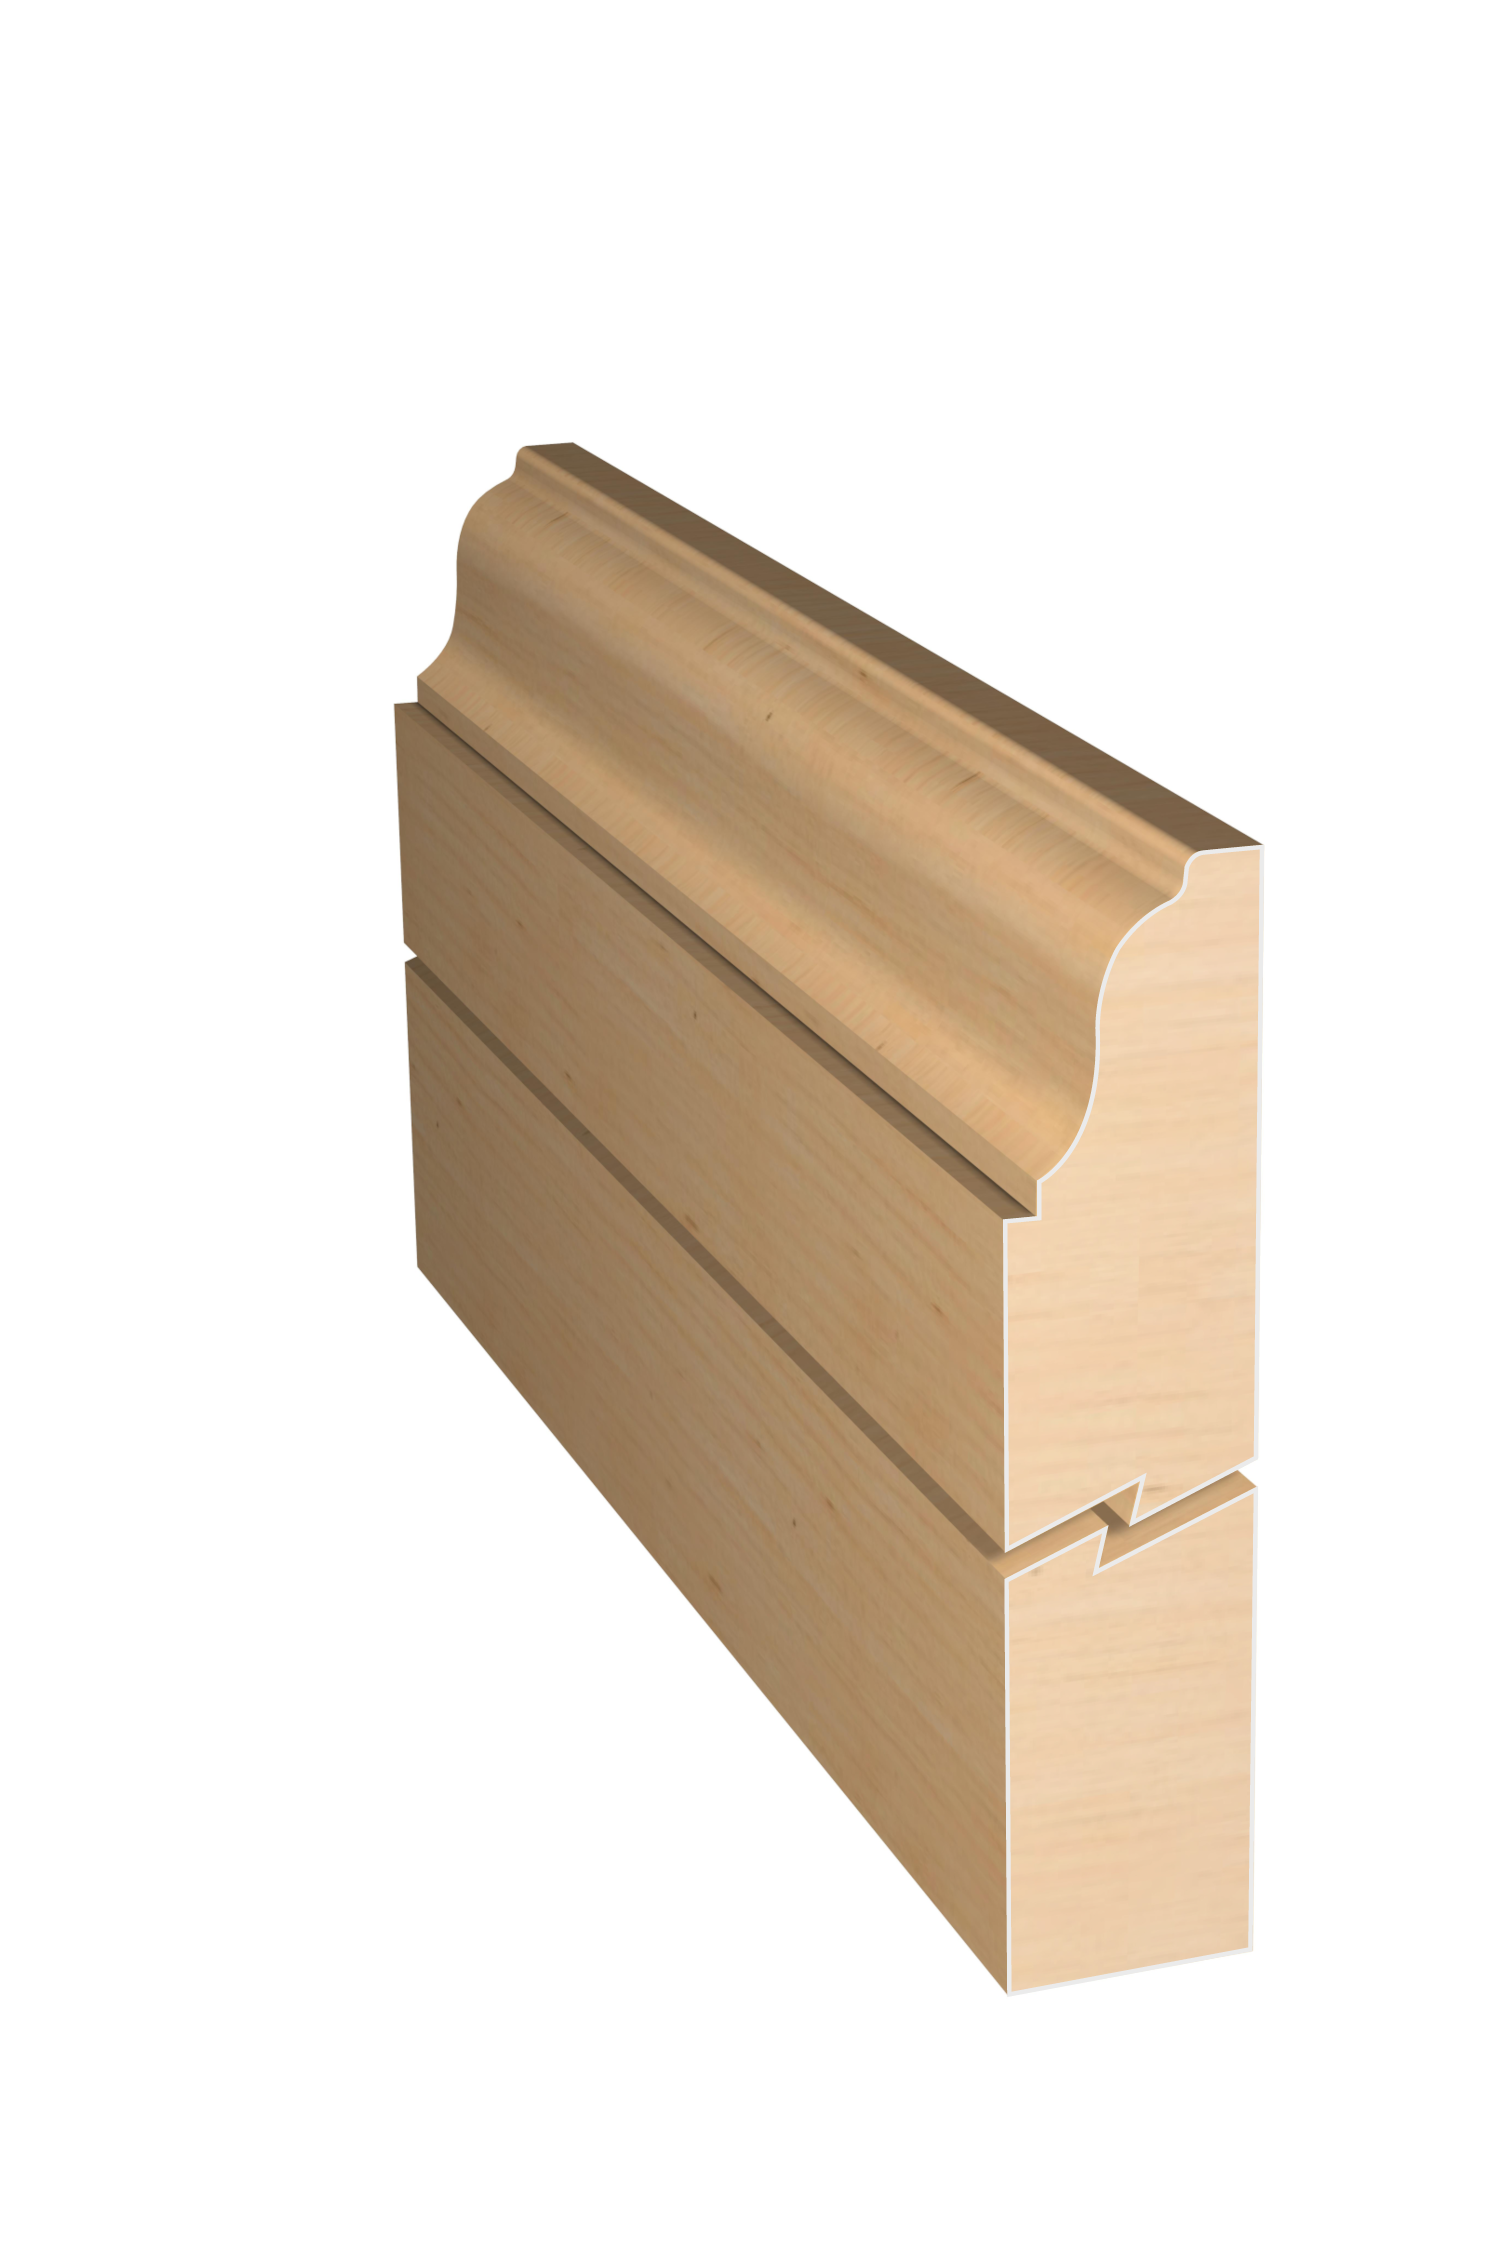 Three dimensional rendering of custom edge profile wood molding SKPL59 made by Public Lumber Company in Detroit.